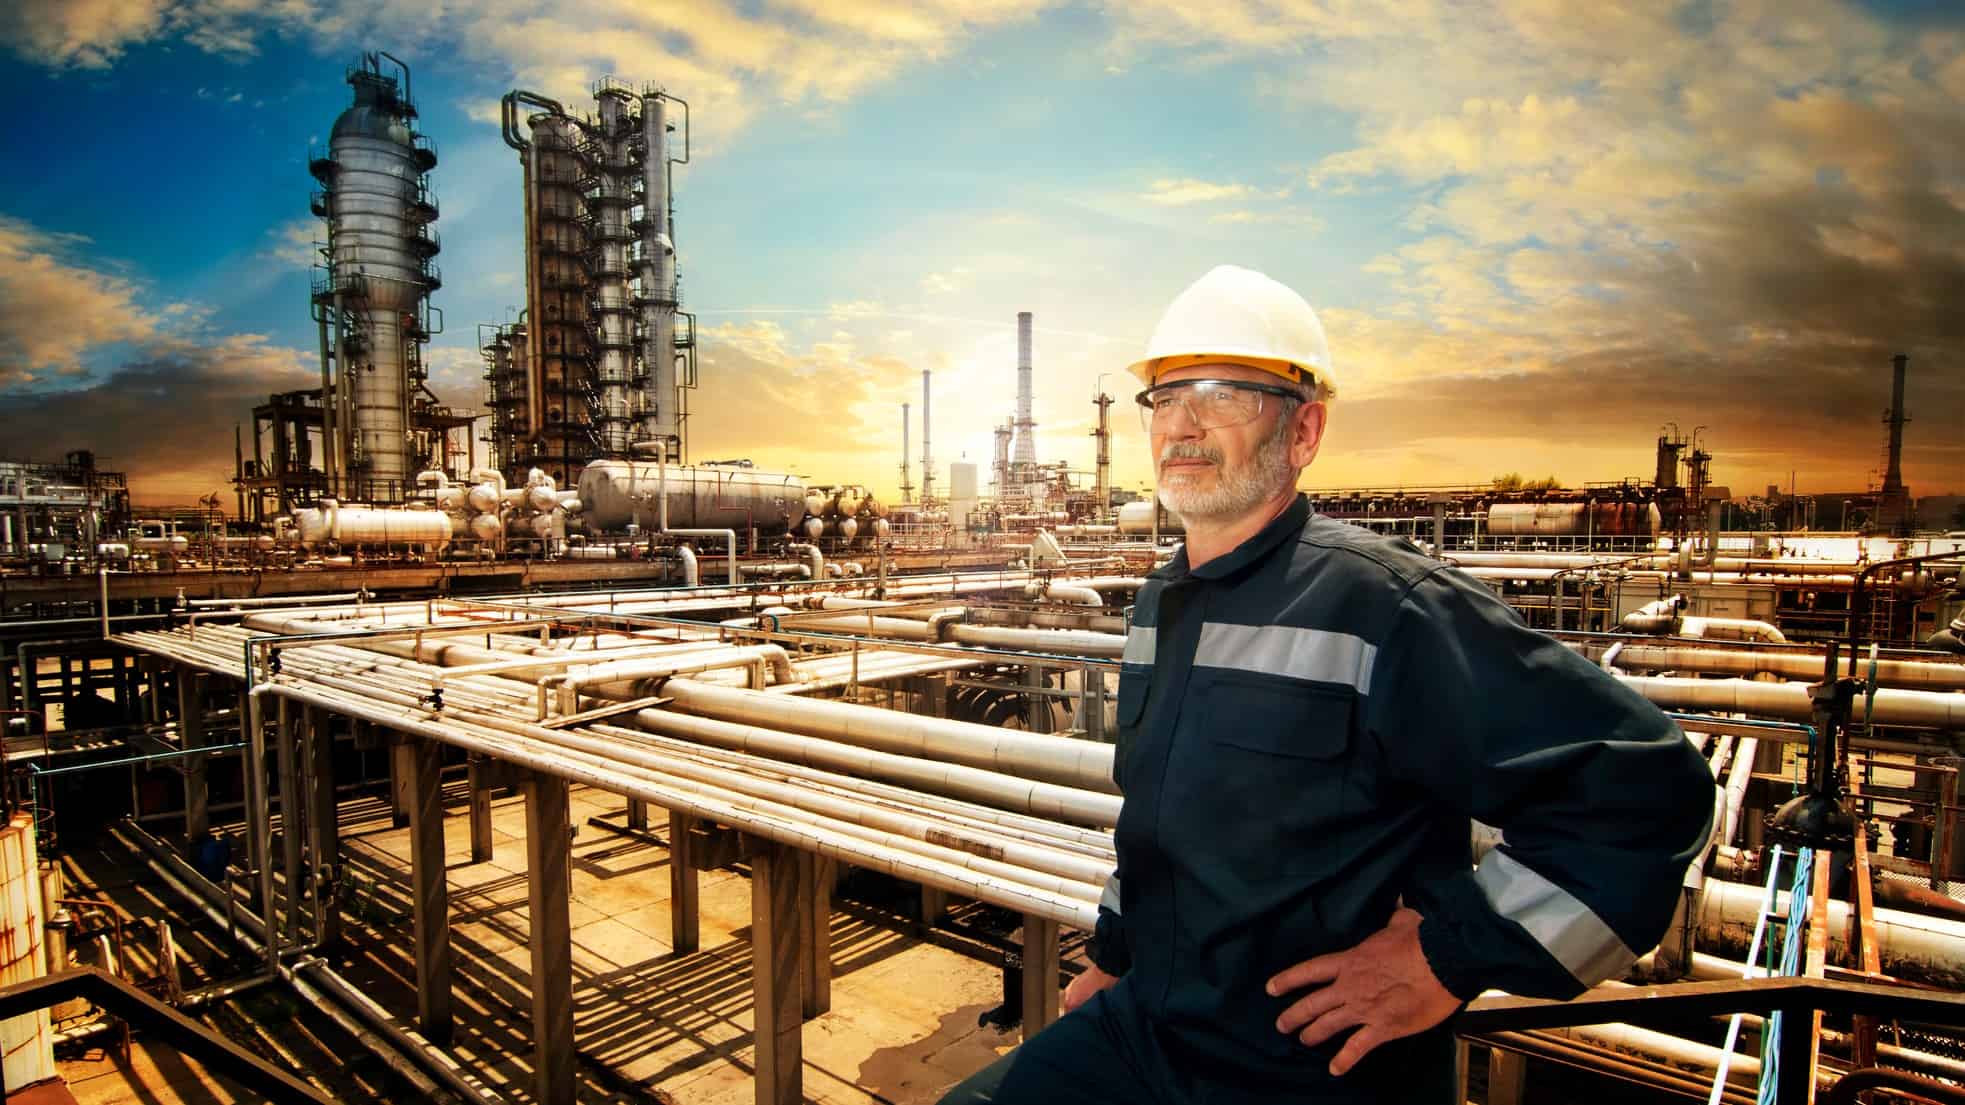 worker in hard hat at an oil refinery